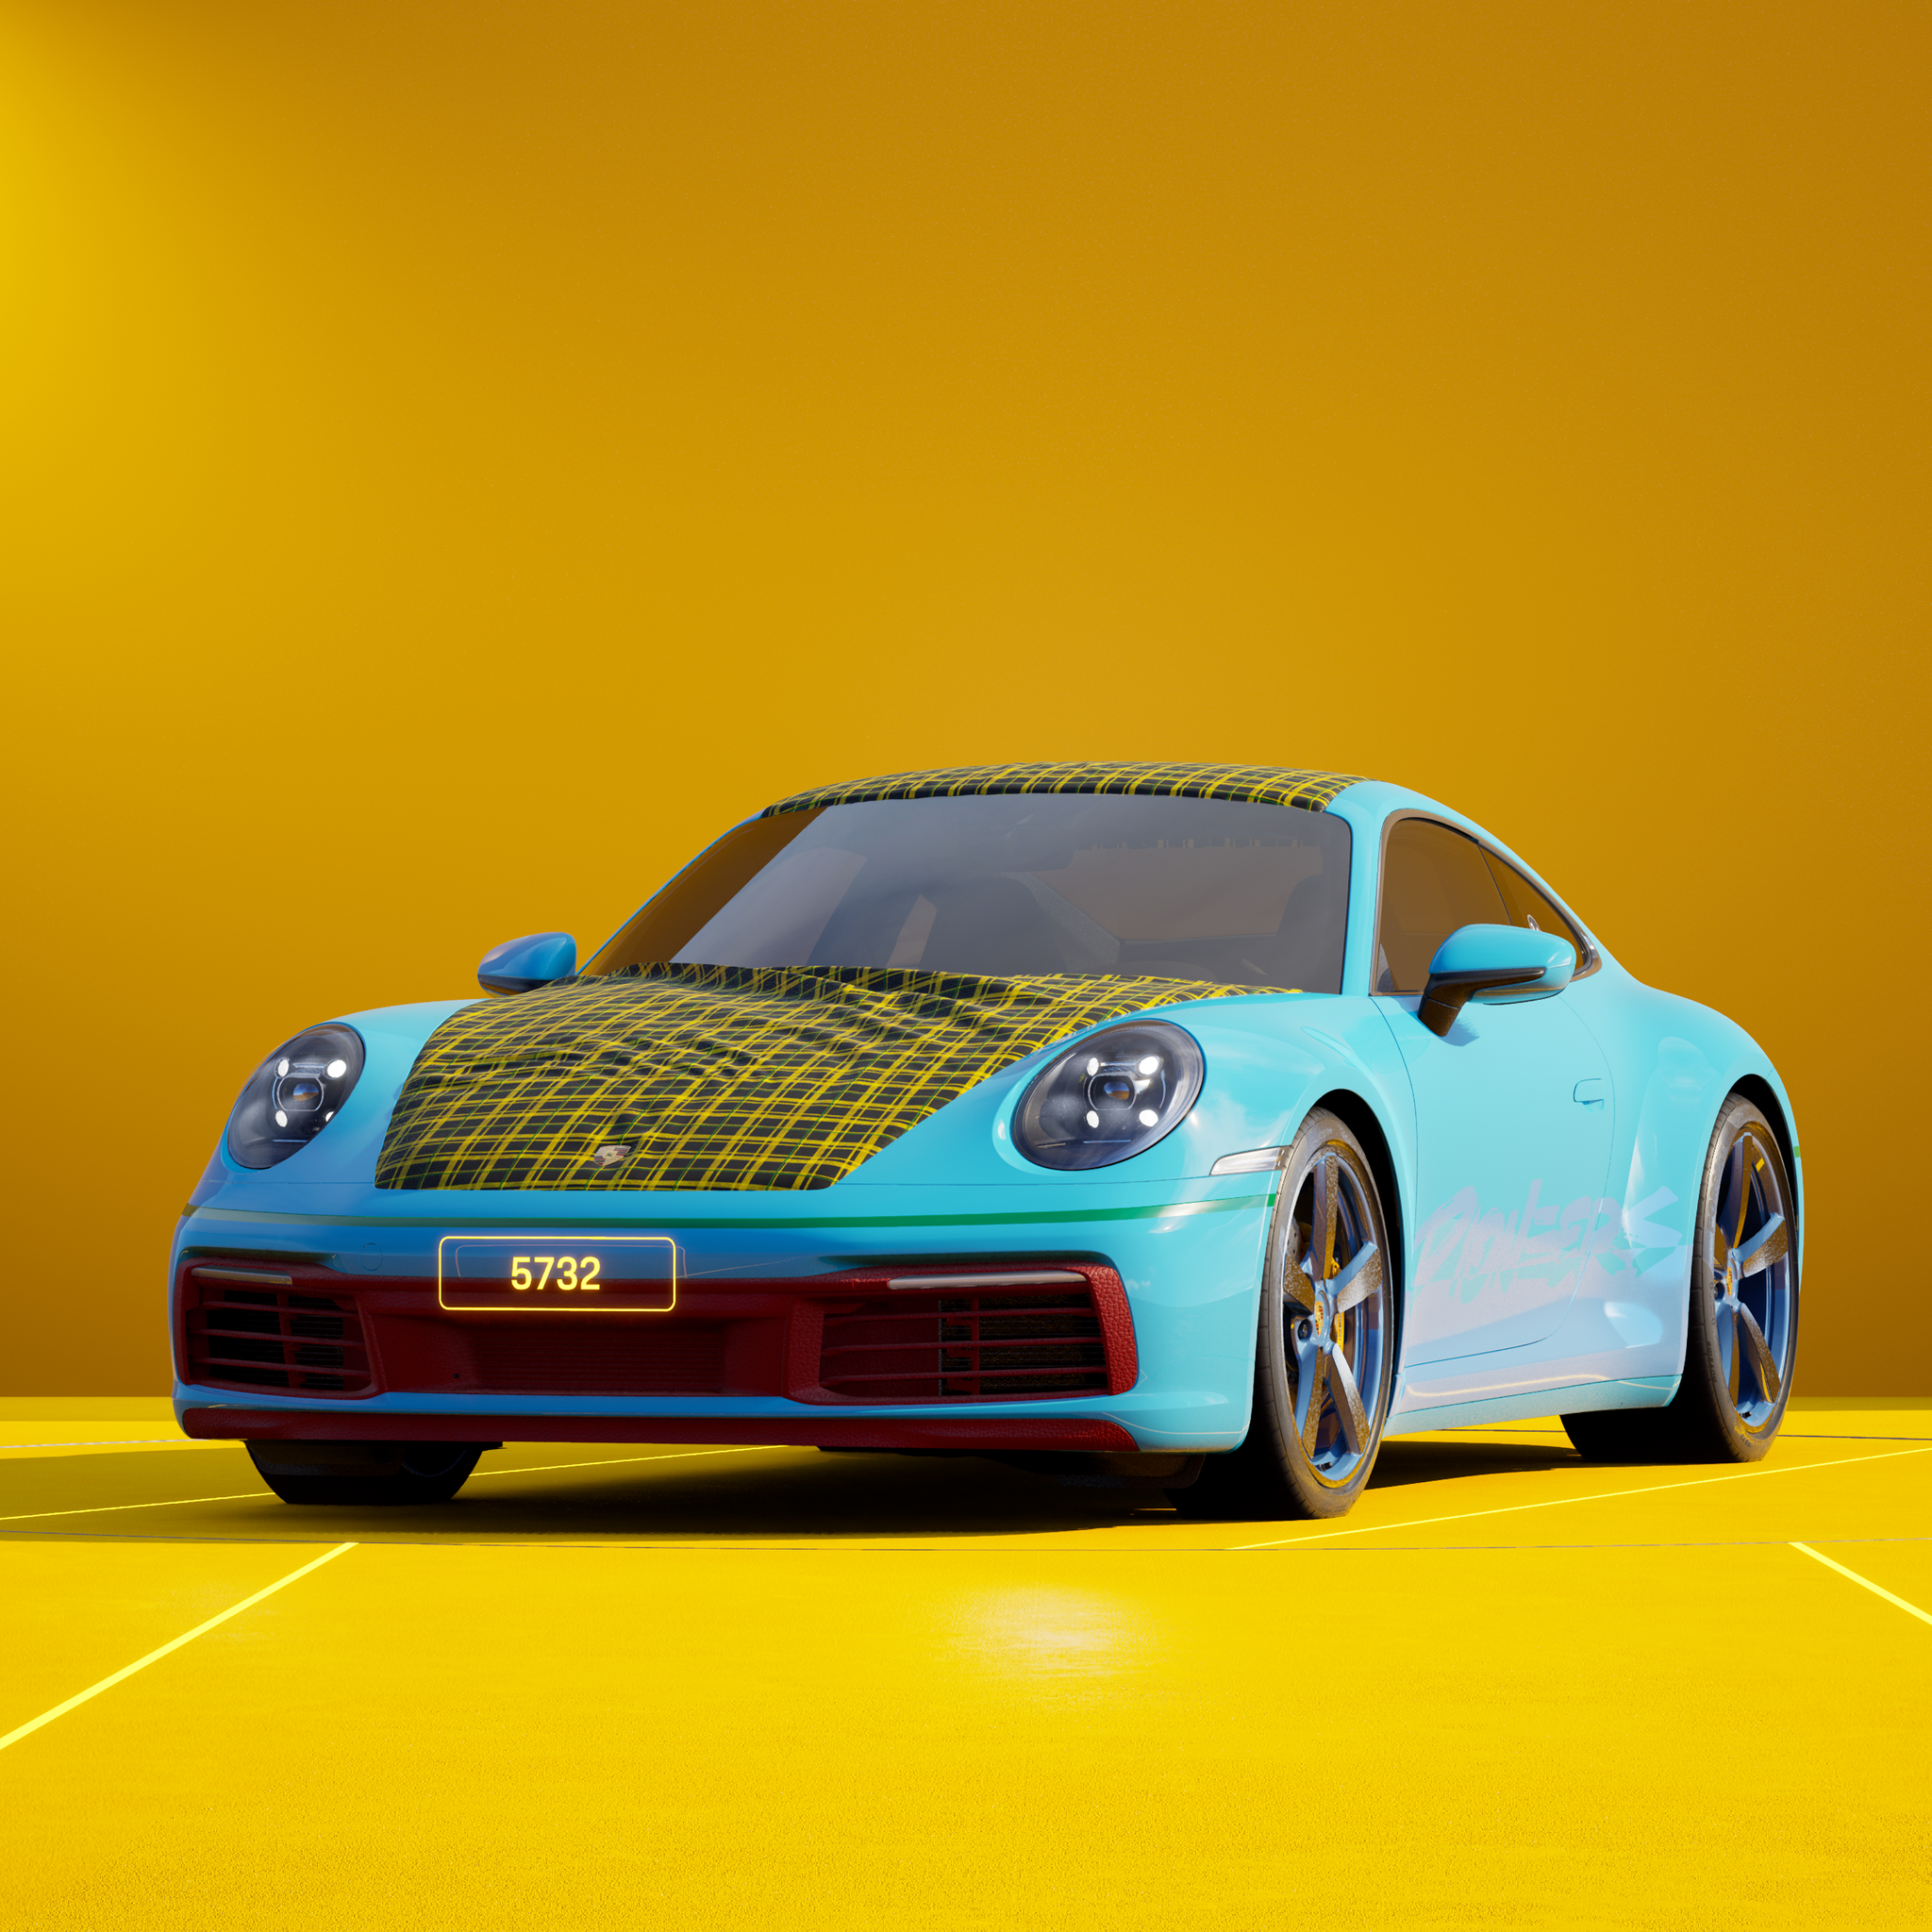 The PORSCHΞ 911 5732 image in phase